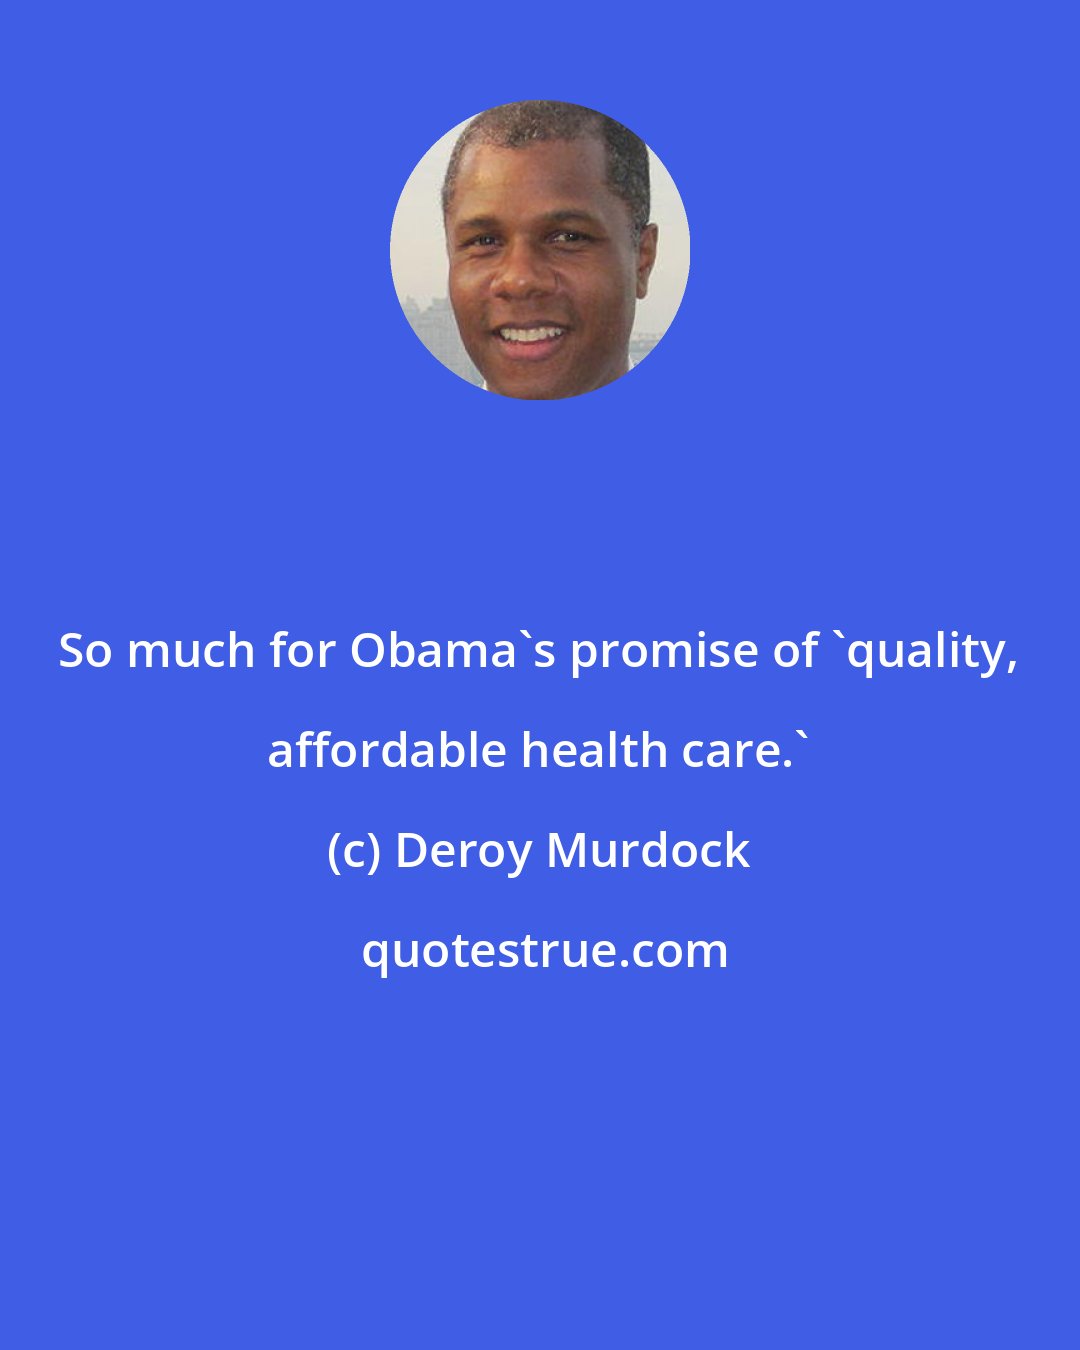 Deroy Murdock: So much for Obama's promise of 'quality, affordable health care.'